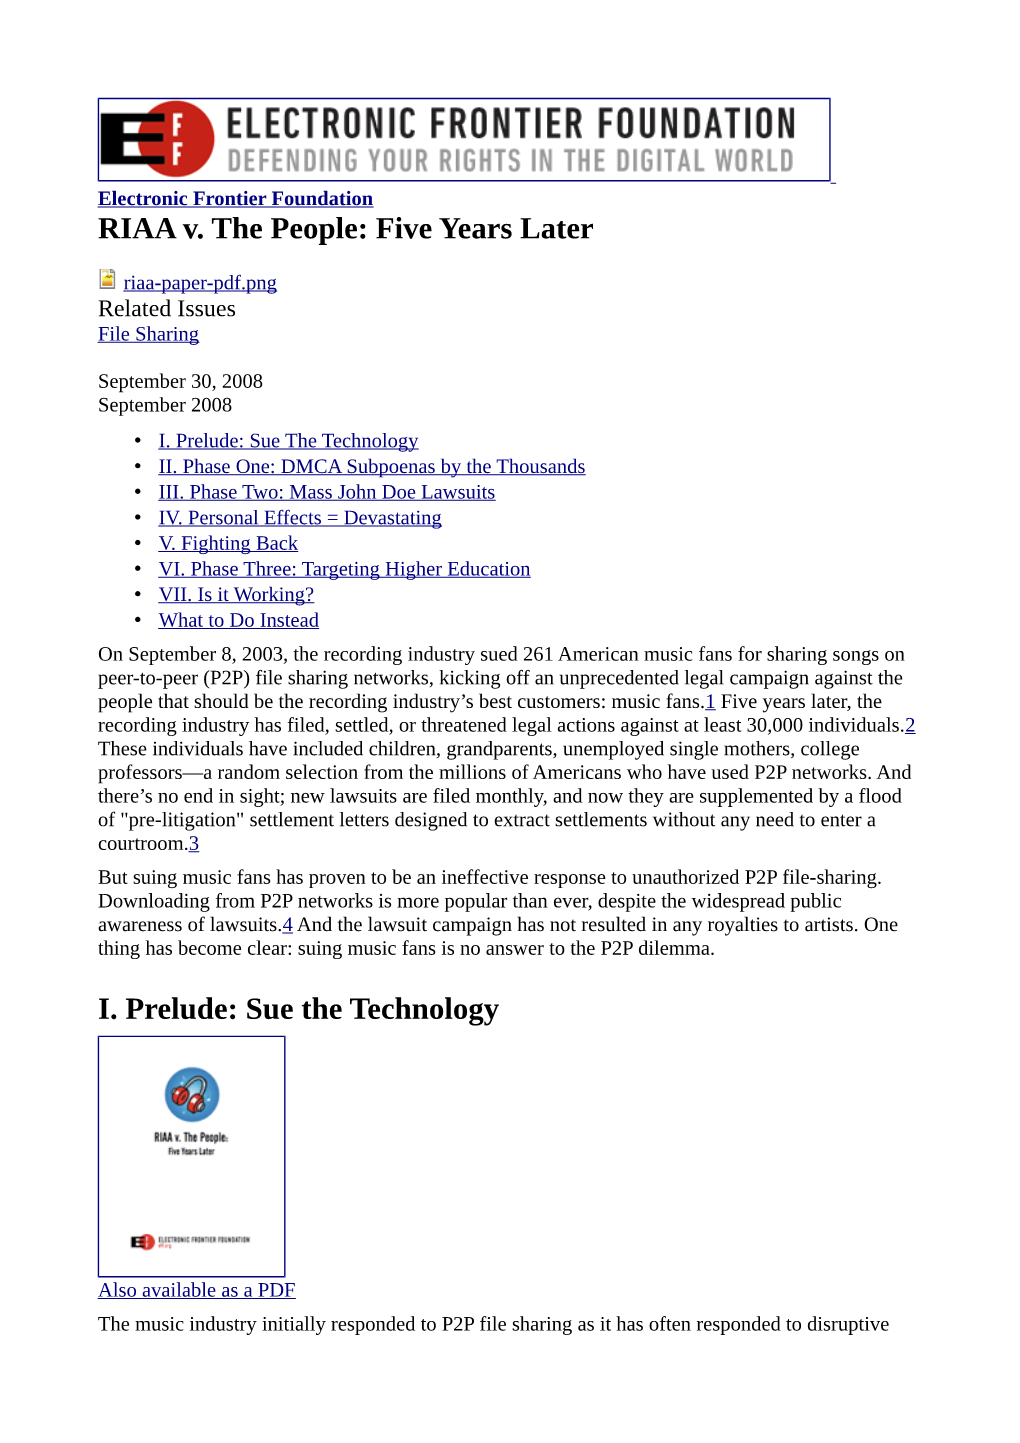 RIAA V. the People: Five Years Later I. Prelude: Sue the Technology